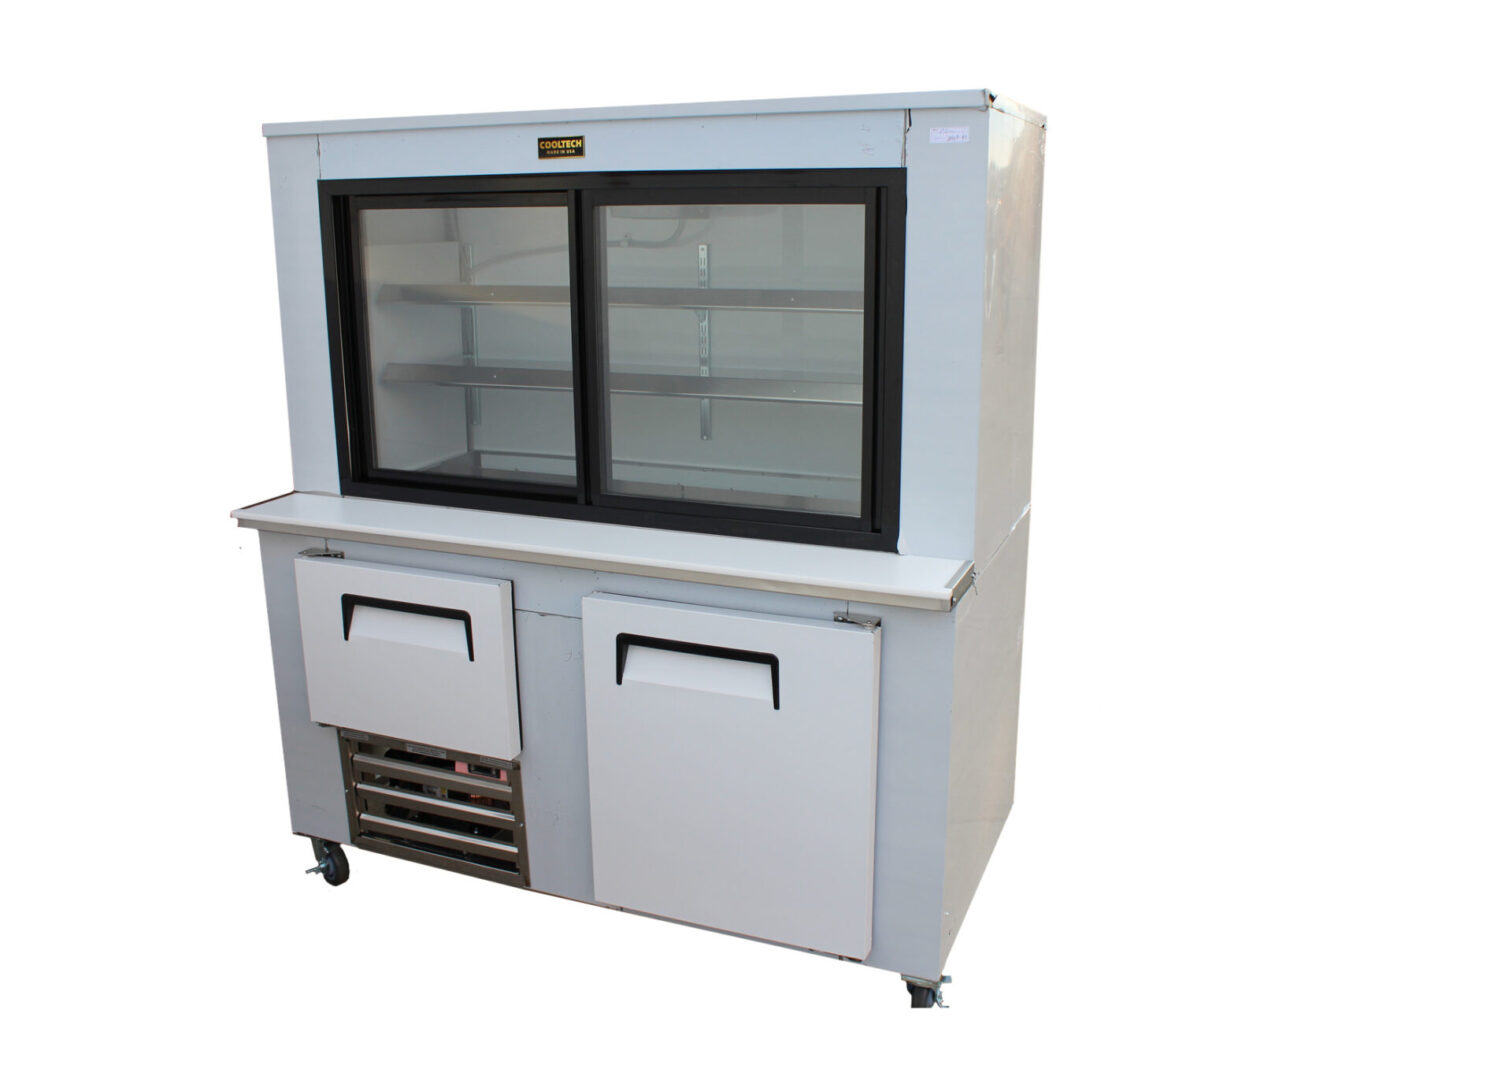 Cooltech Stainless Steel Refrigerated Pie Case 48" with two glass sliding doors on top and two closed cabinets below, set on wheels, isolated on a white background.